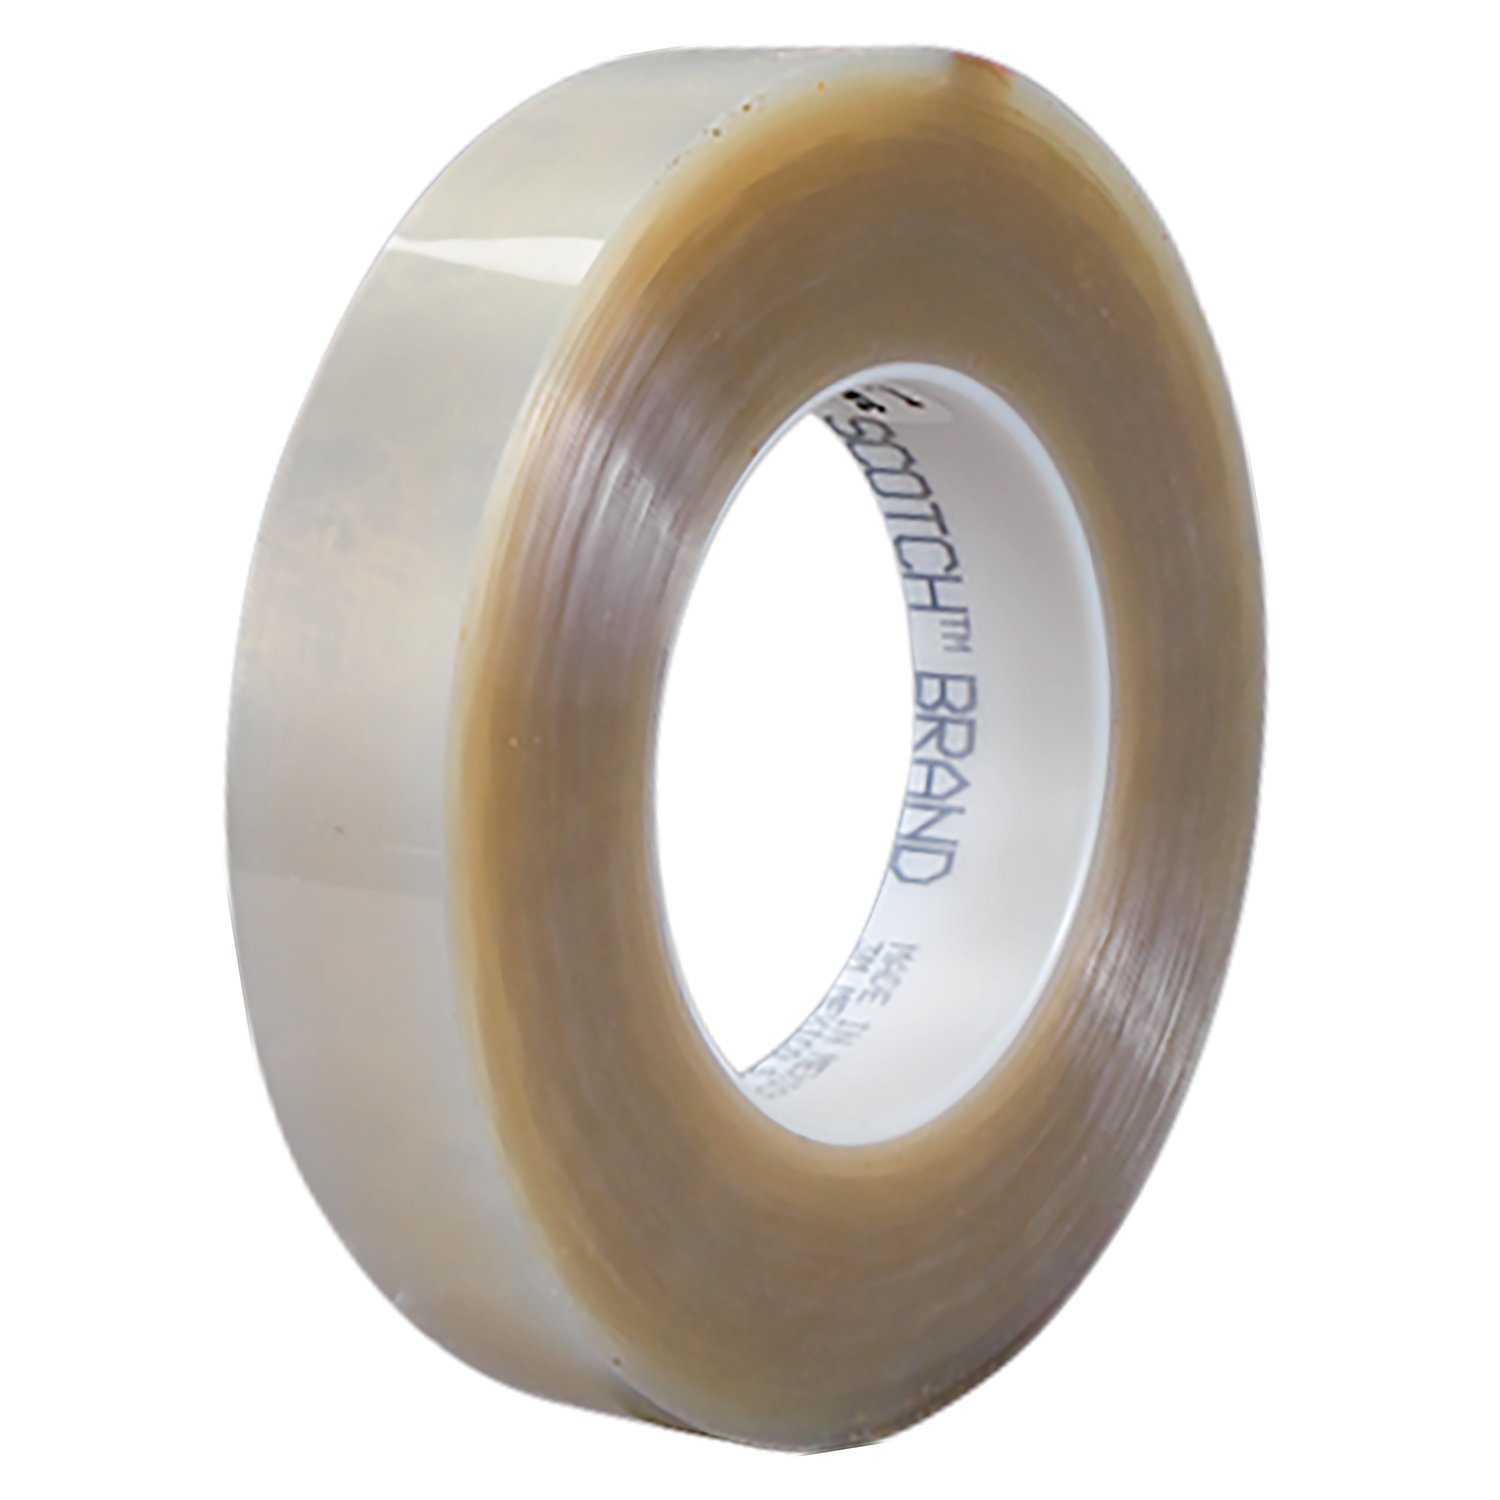 7010048704 - 3M Polyester Tape 8412, Transparent, 0.65 in x 72 yd, 6.3 mil, 64 rolls per case